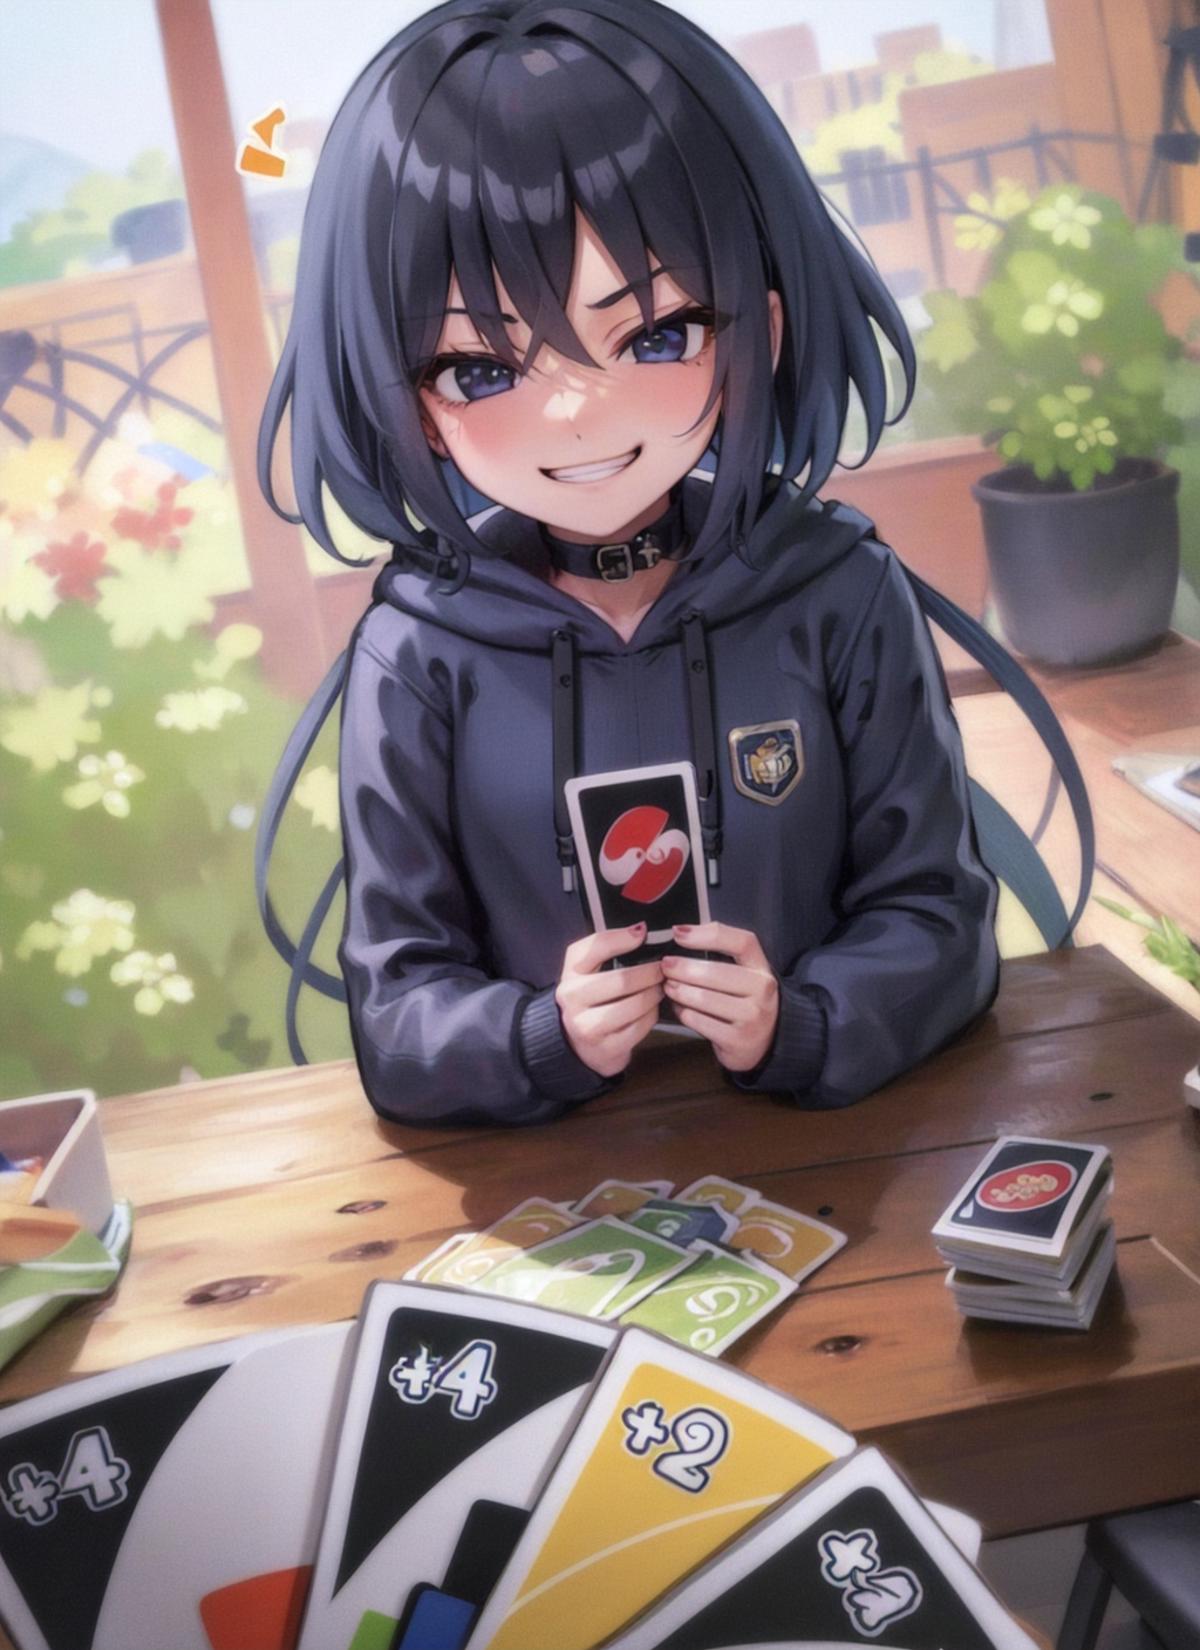 A girl sitting at a table with a deck of cards and a potted plant in the background.